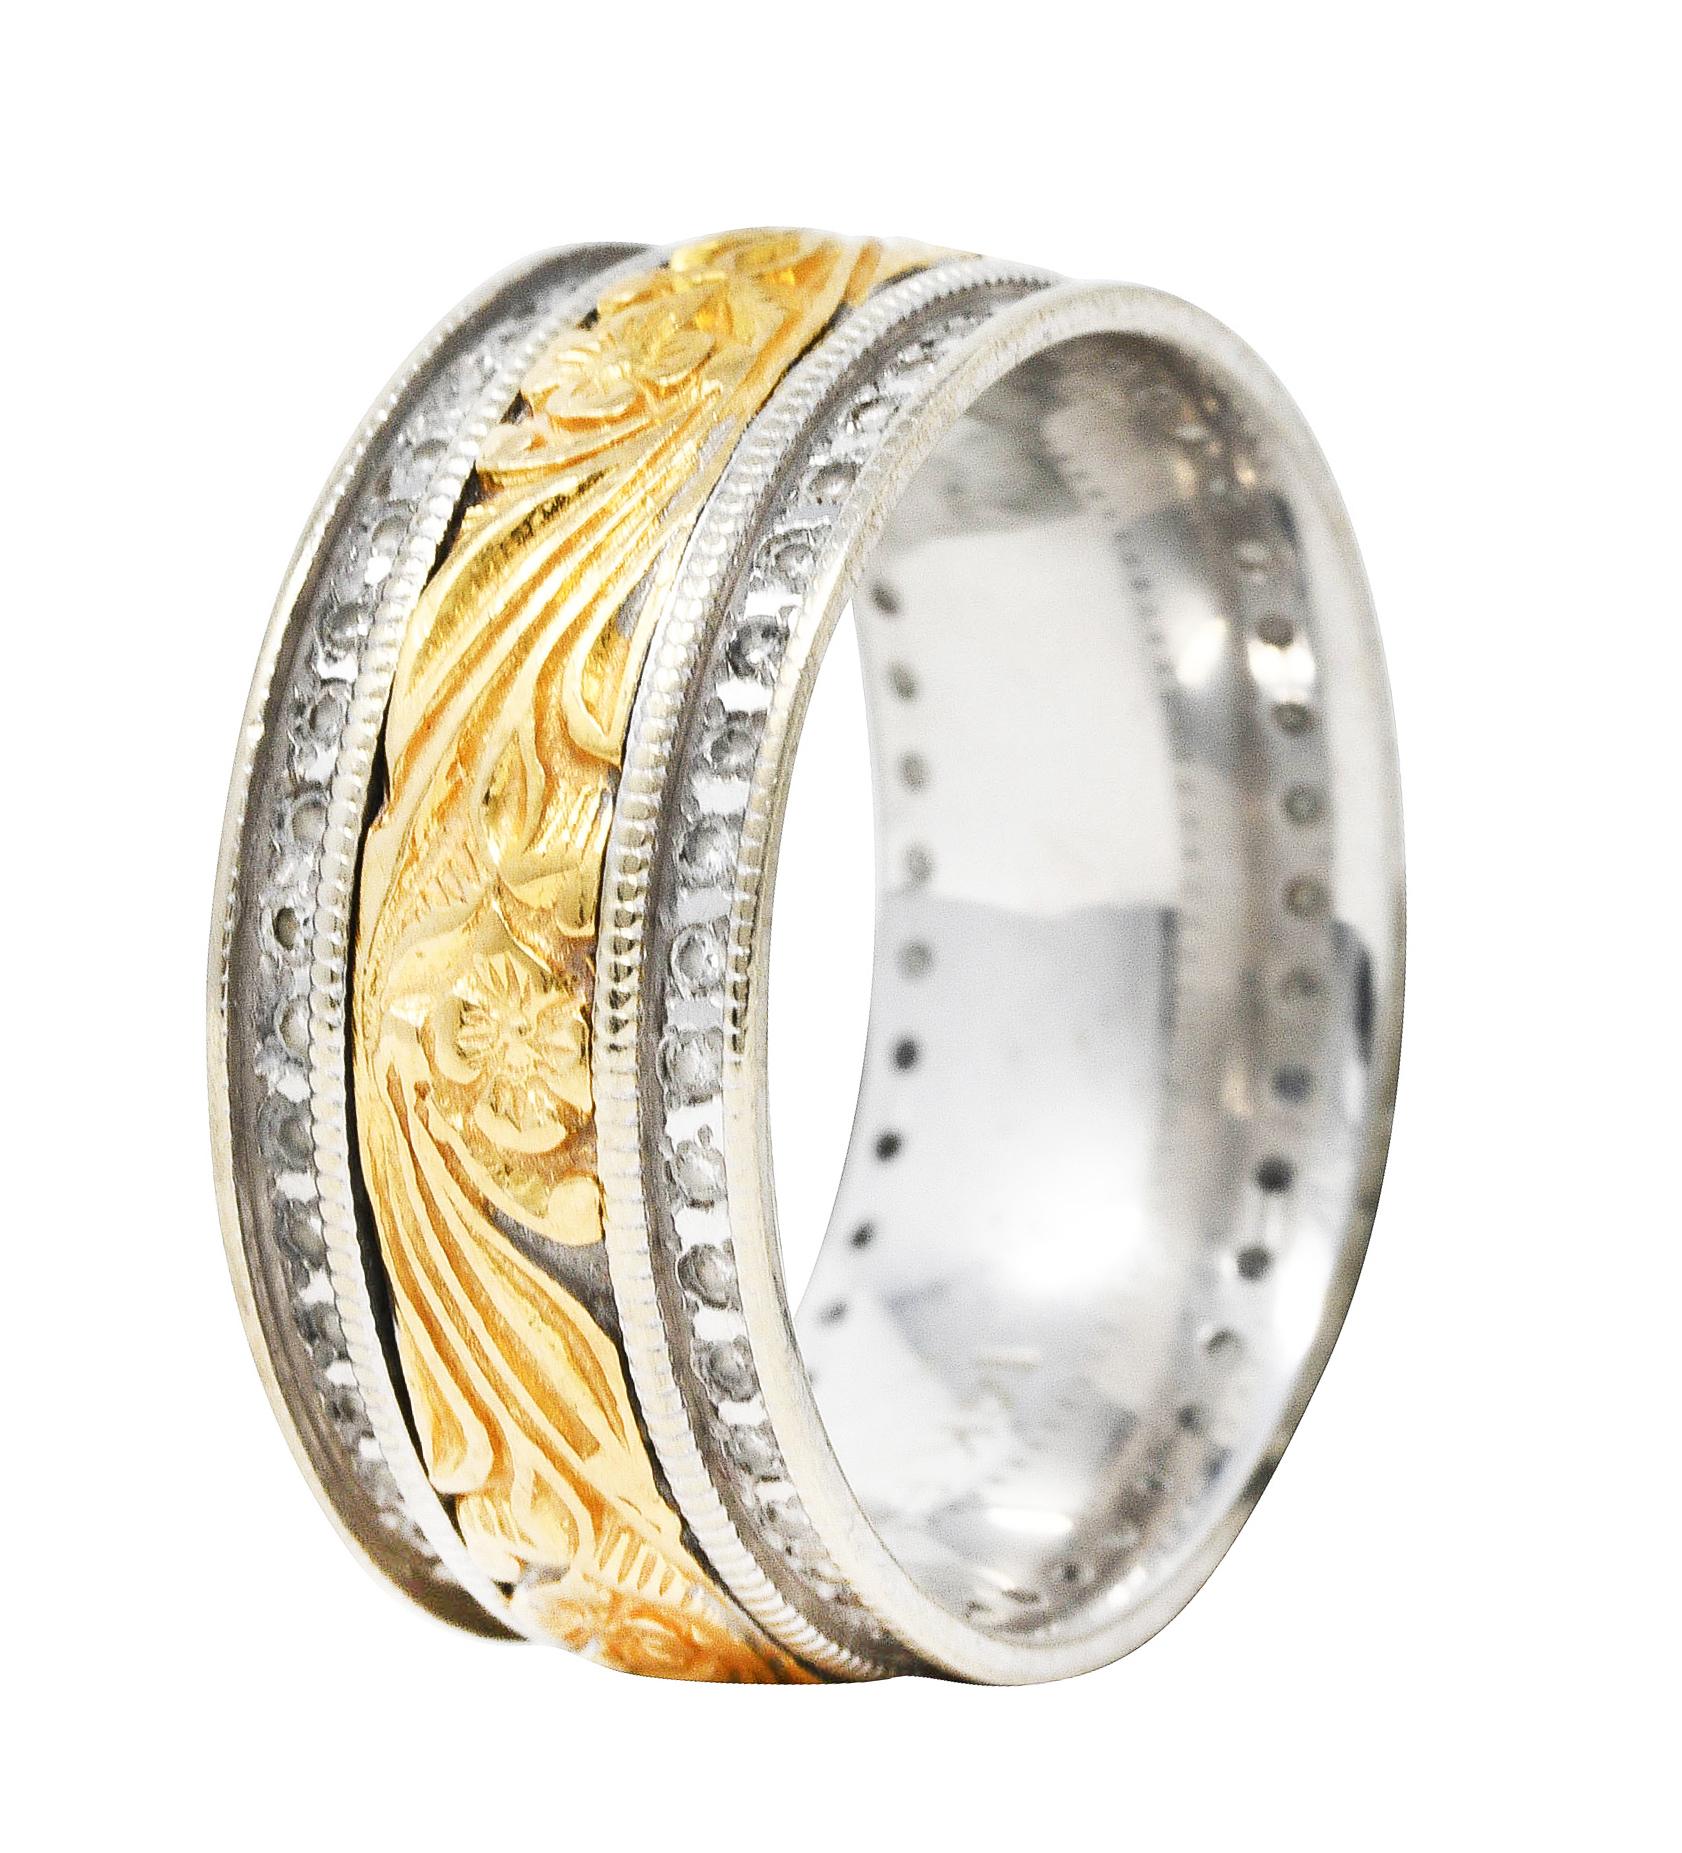 Wide band ring centers repoussè gold depicting highly rendered scrolling florals

Flanked by white gold with a recessed groove accented by round brilliant cut diamonds

Weighing in total approximately 1.00 carat with G/H color and SI